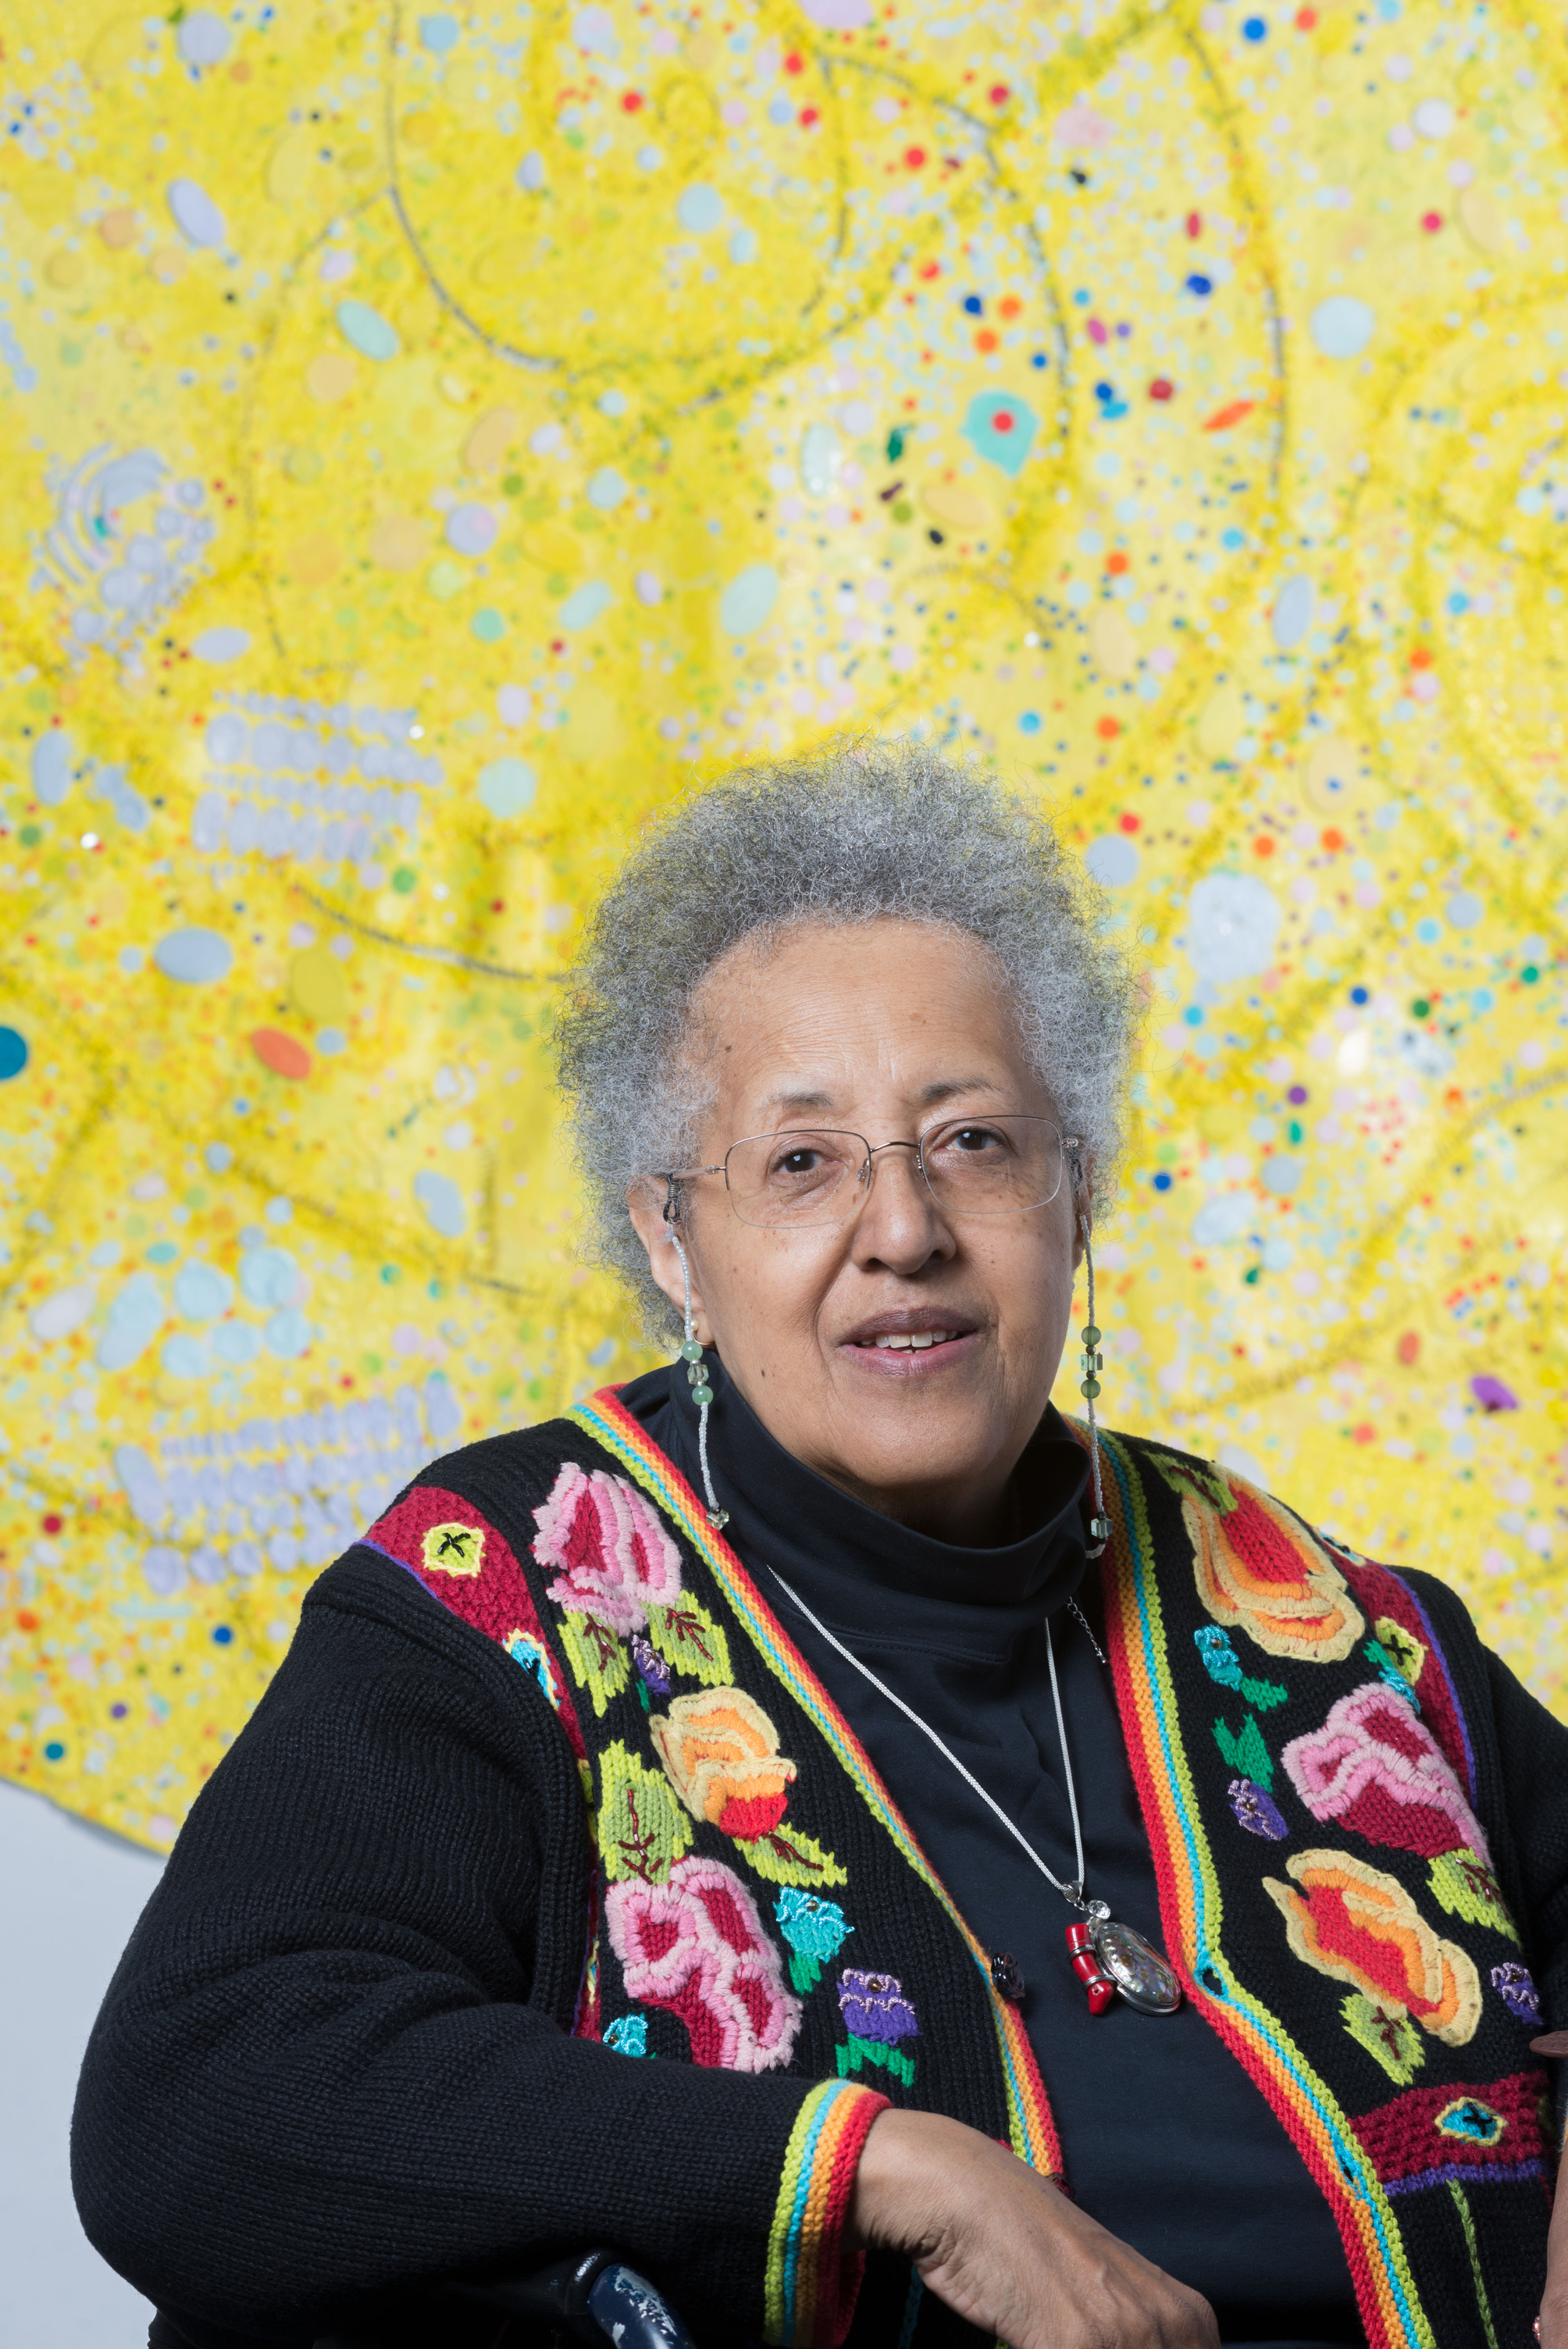 As part of The Shed’s mission to help artists bring to life works that they have not yet been able to realize, Howardena Pindell was able to create a piece she's been envisioning for four decades (Nathan Keay)